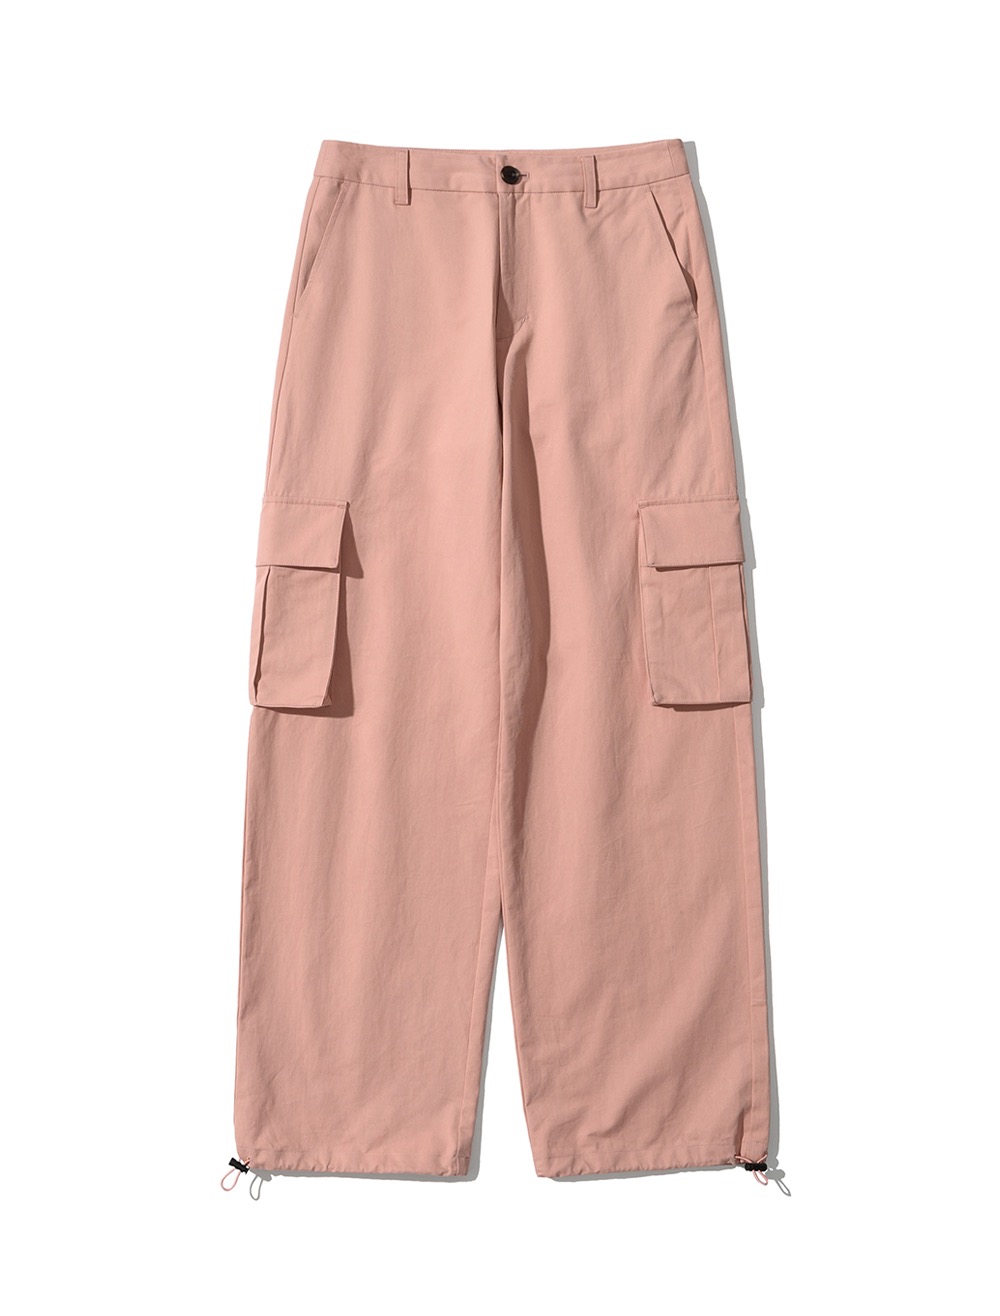 LOW RISE CARGO PANTS [DUSTY PINK]